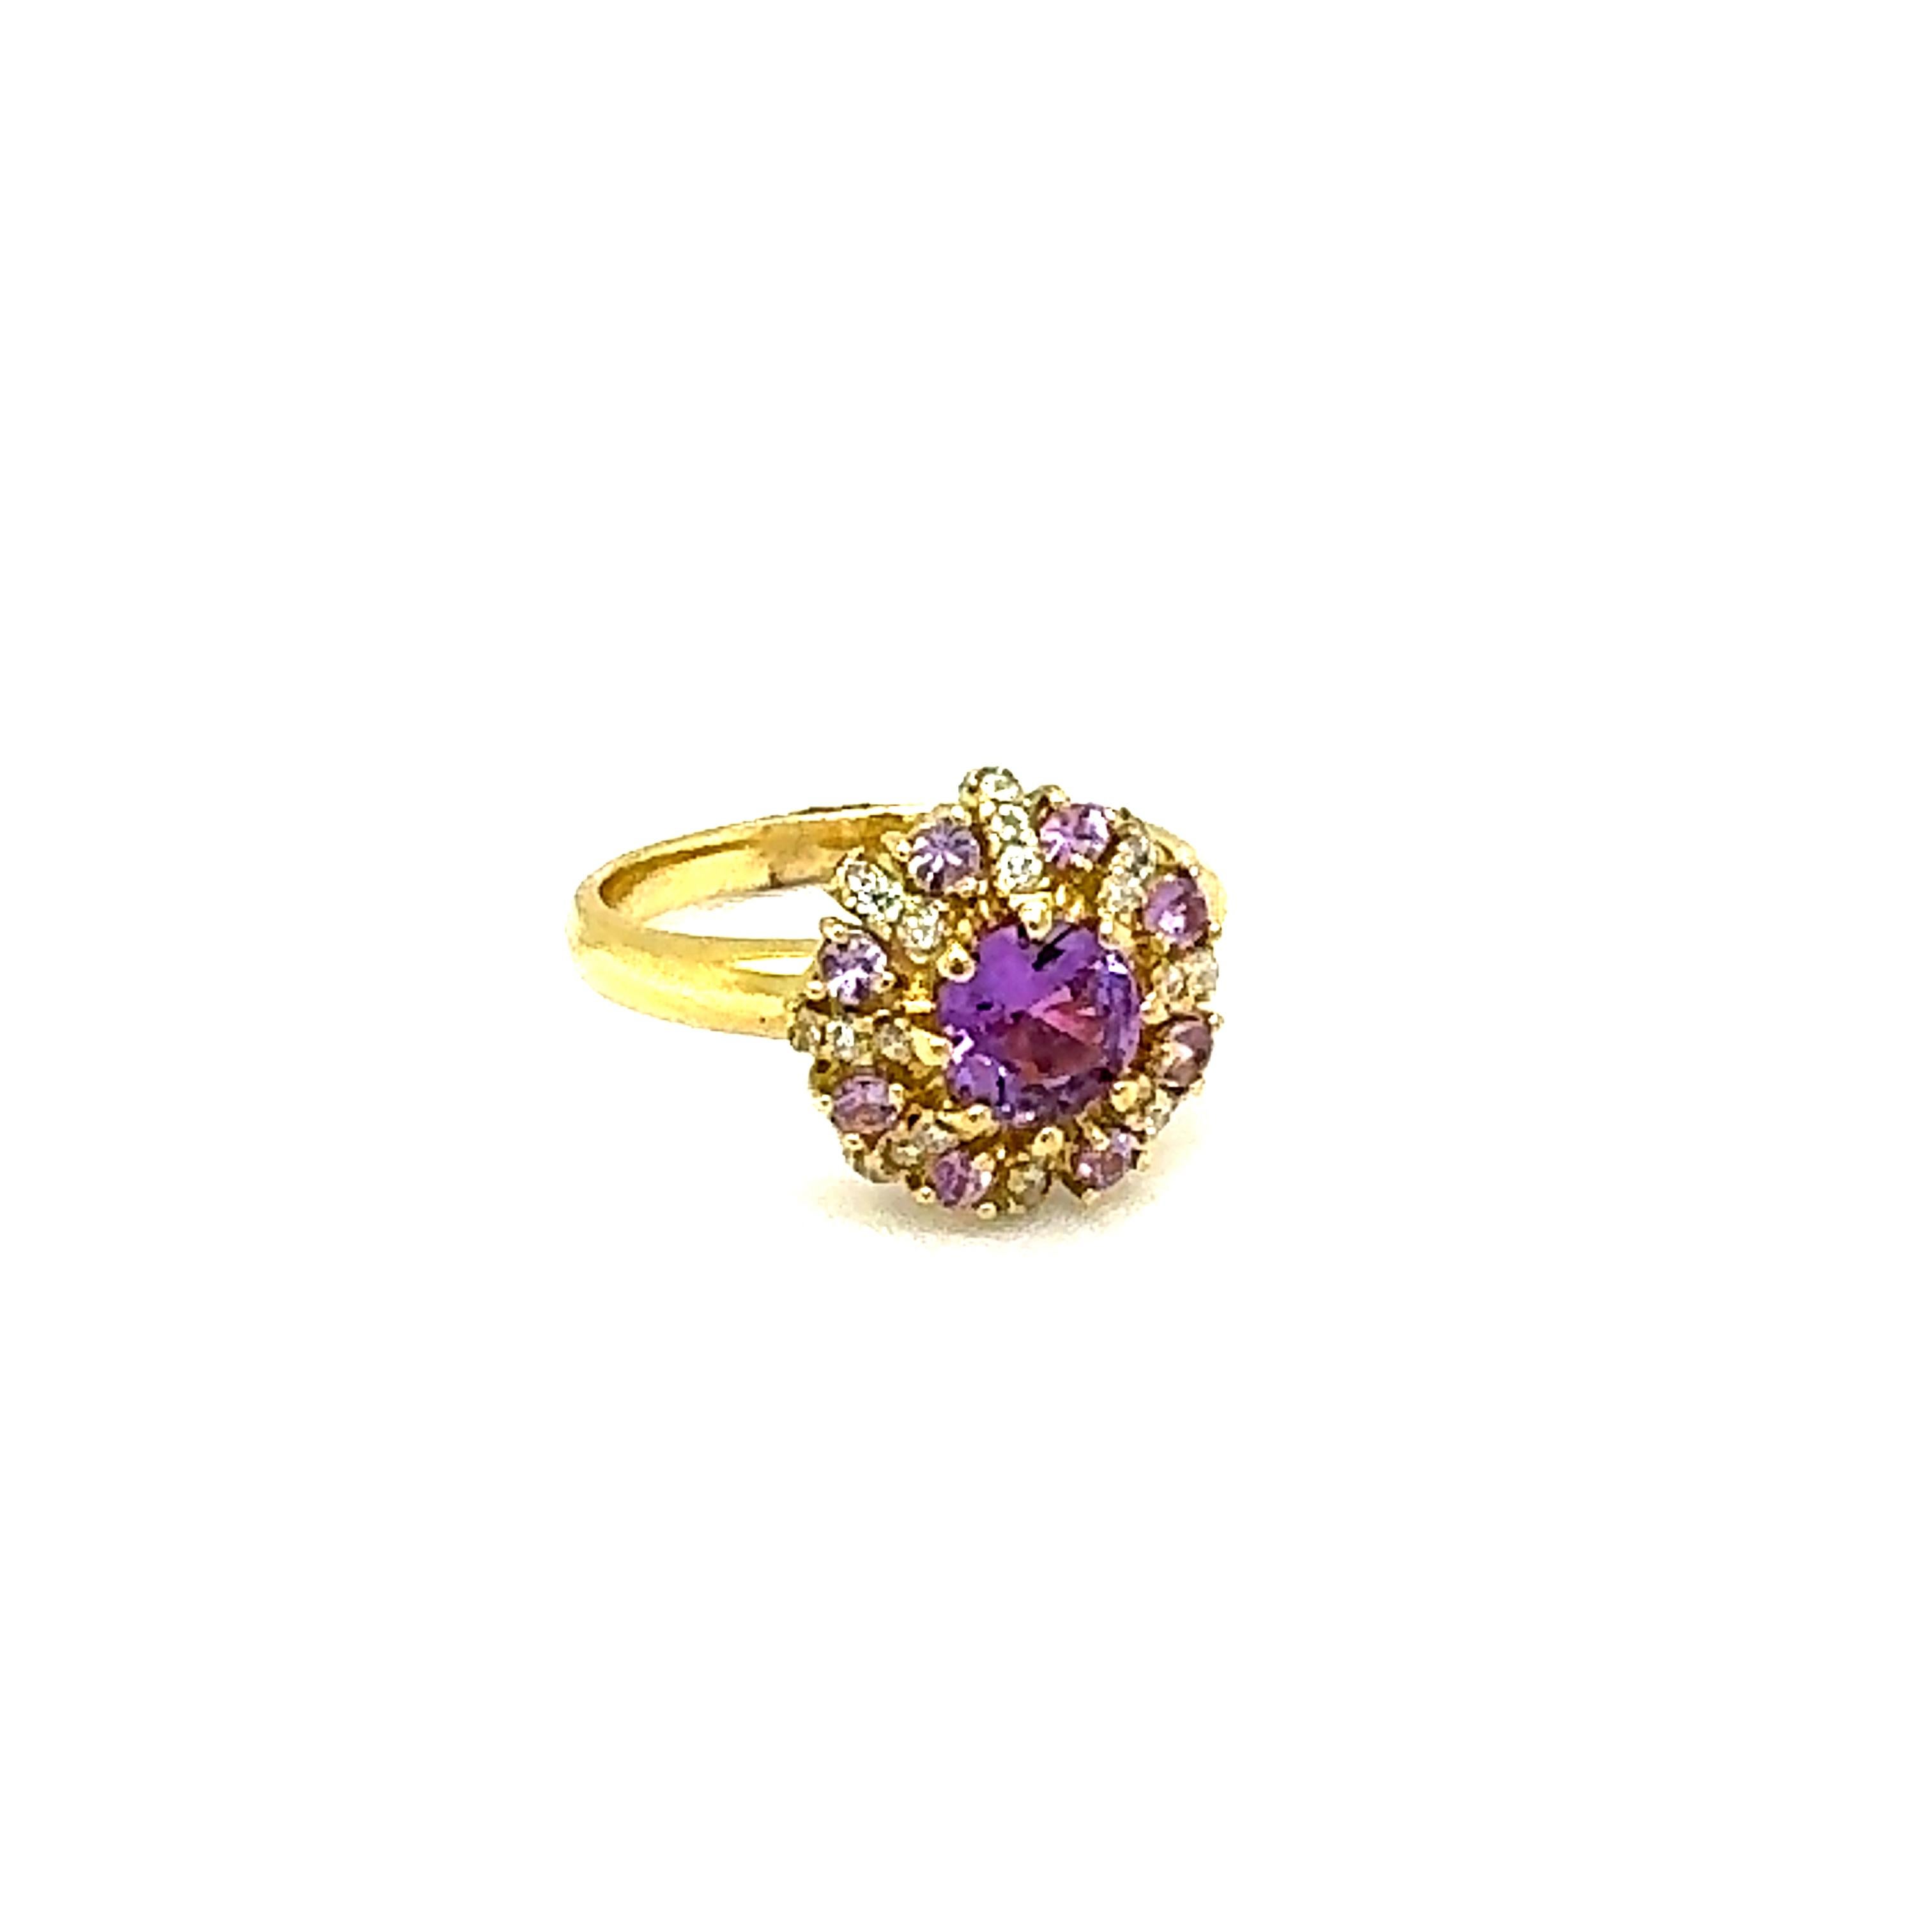 Cushion Cut 1.46 Carat GIA Certified Pink Sapphire Diamond Yellow Gold Ring For Sale